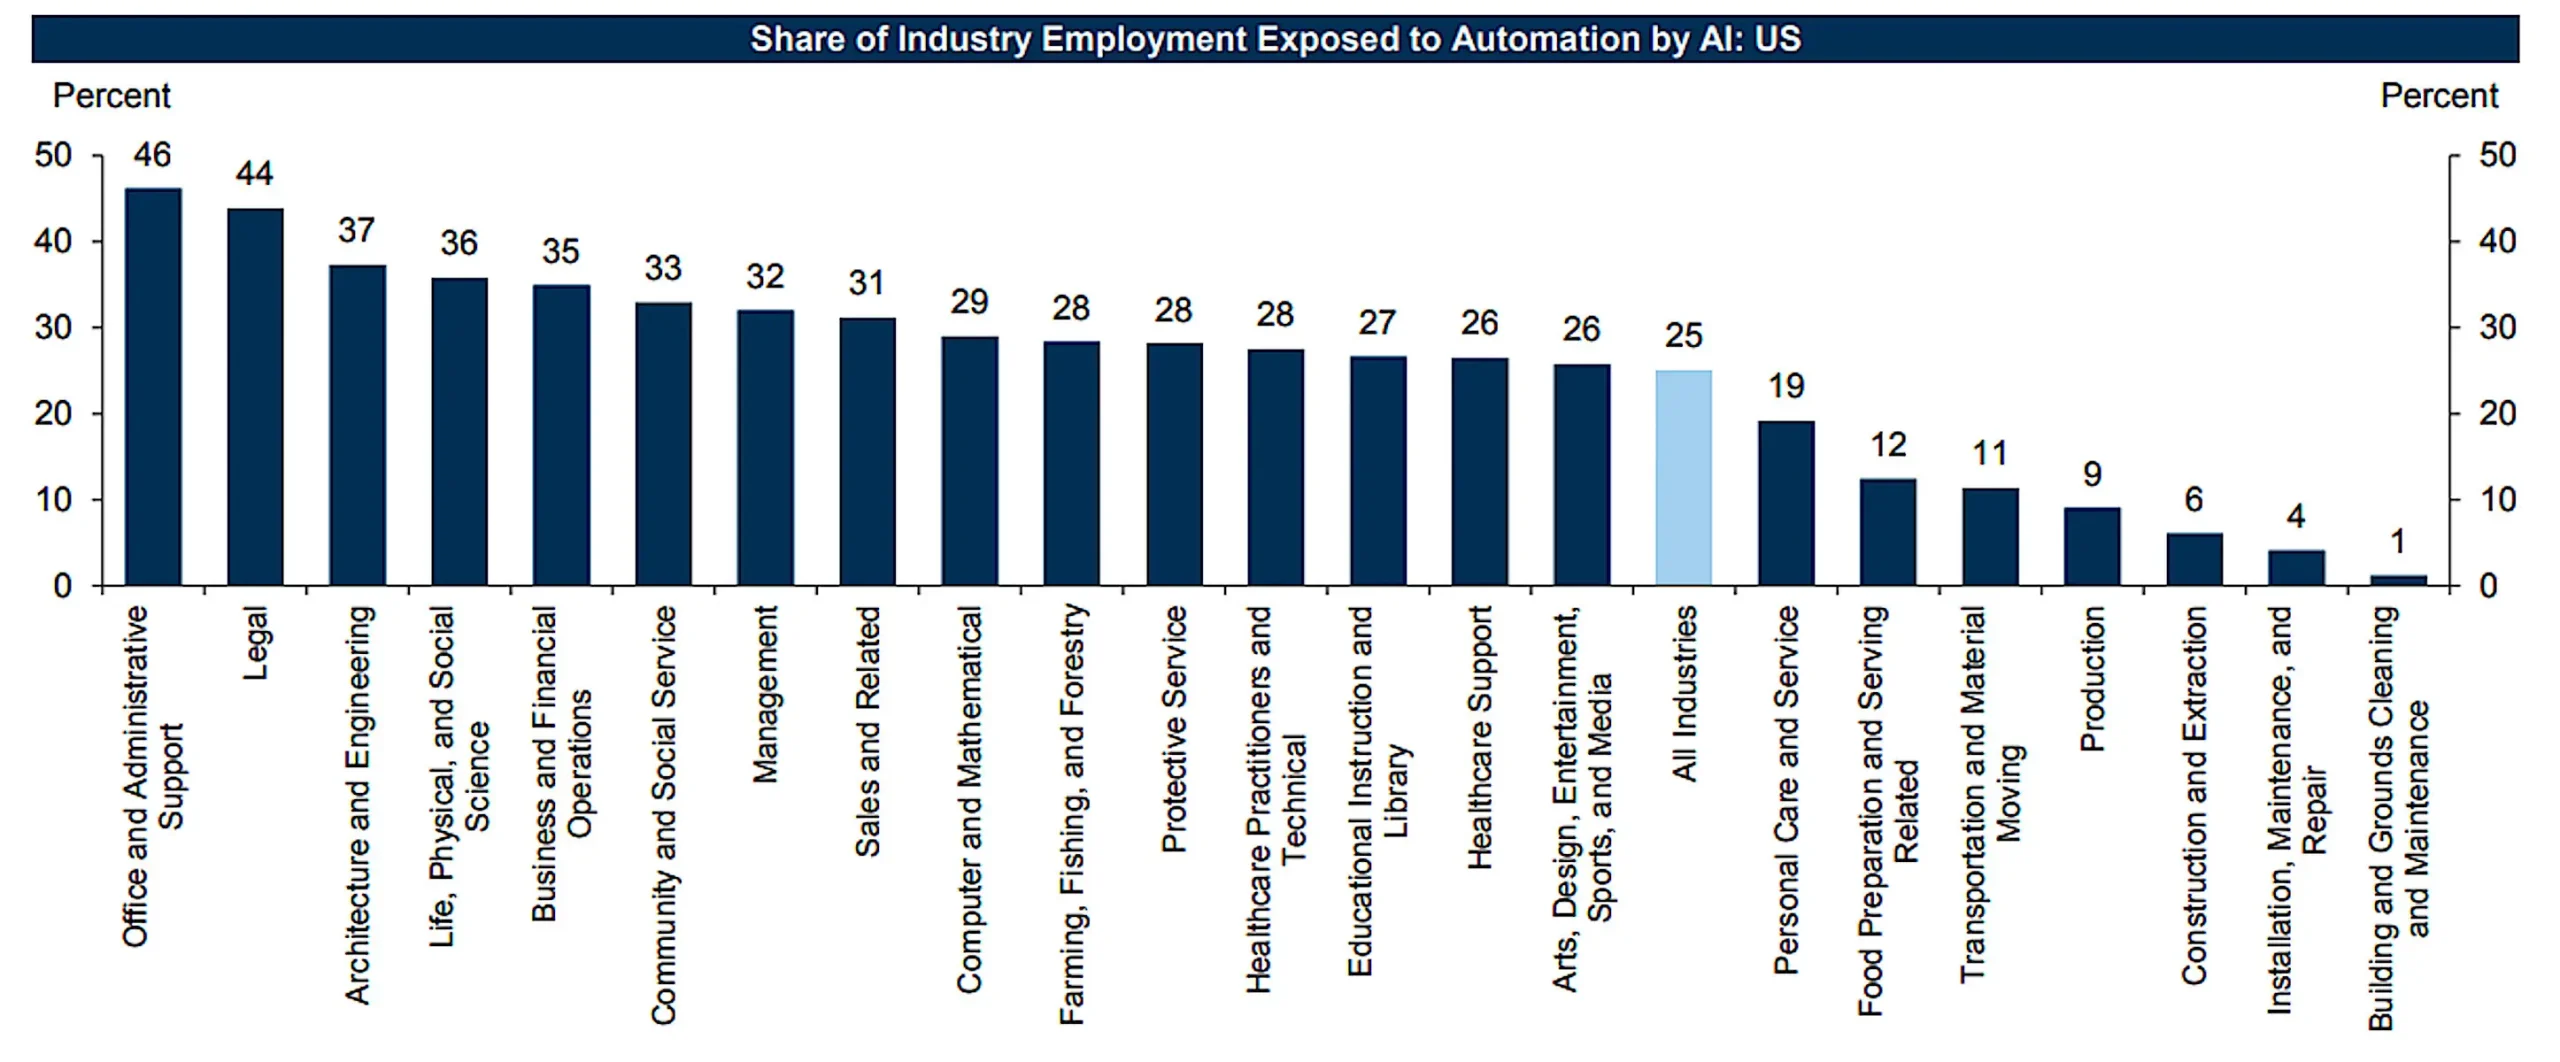 Share of industry employment exposed to automation by artificial intelligence AI - Industries most at risk of AI eliminating jobs